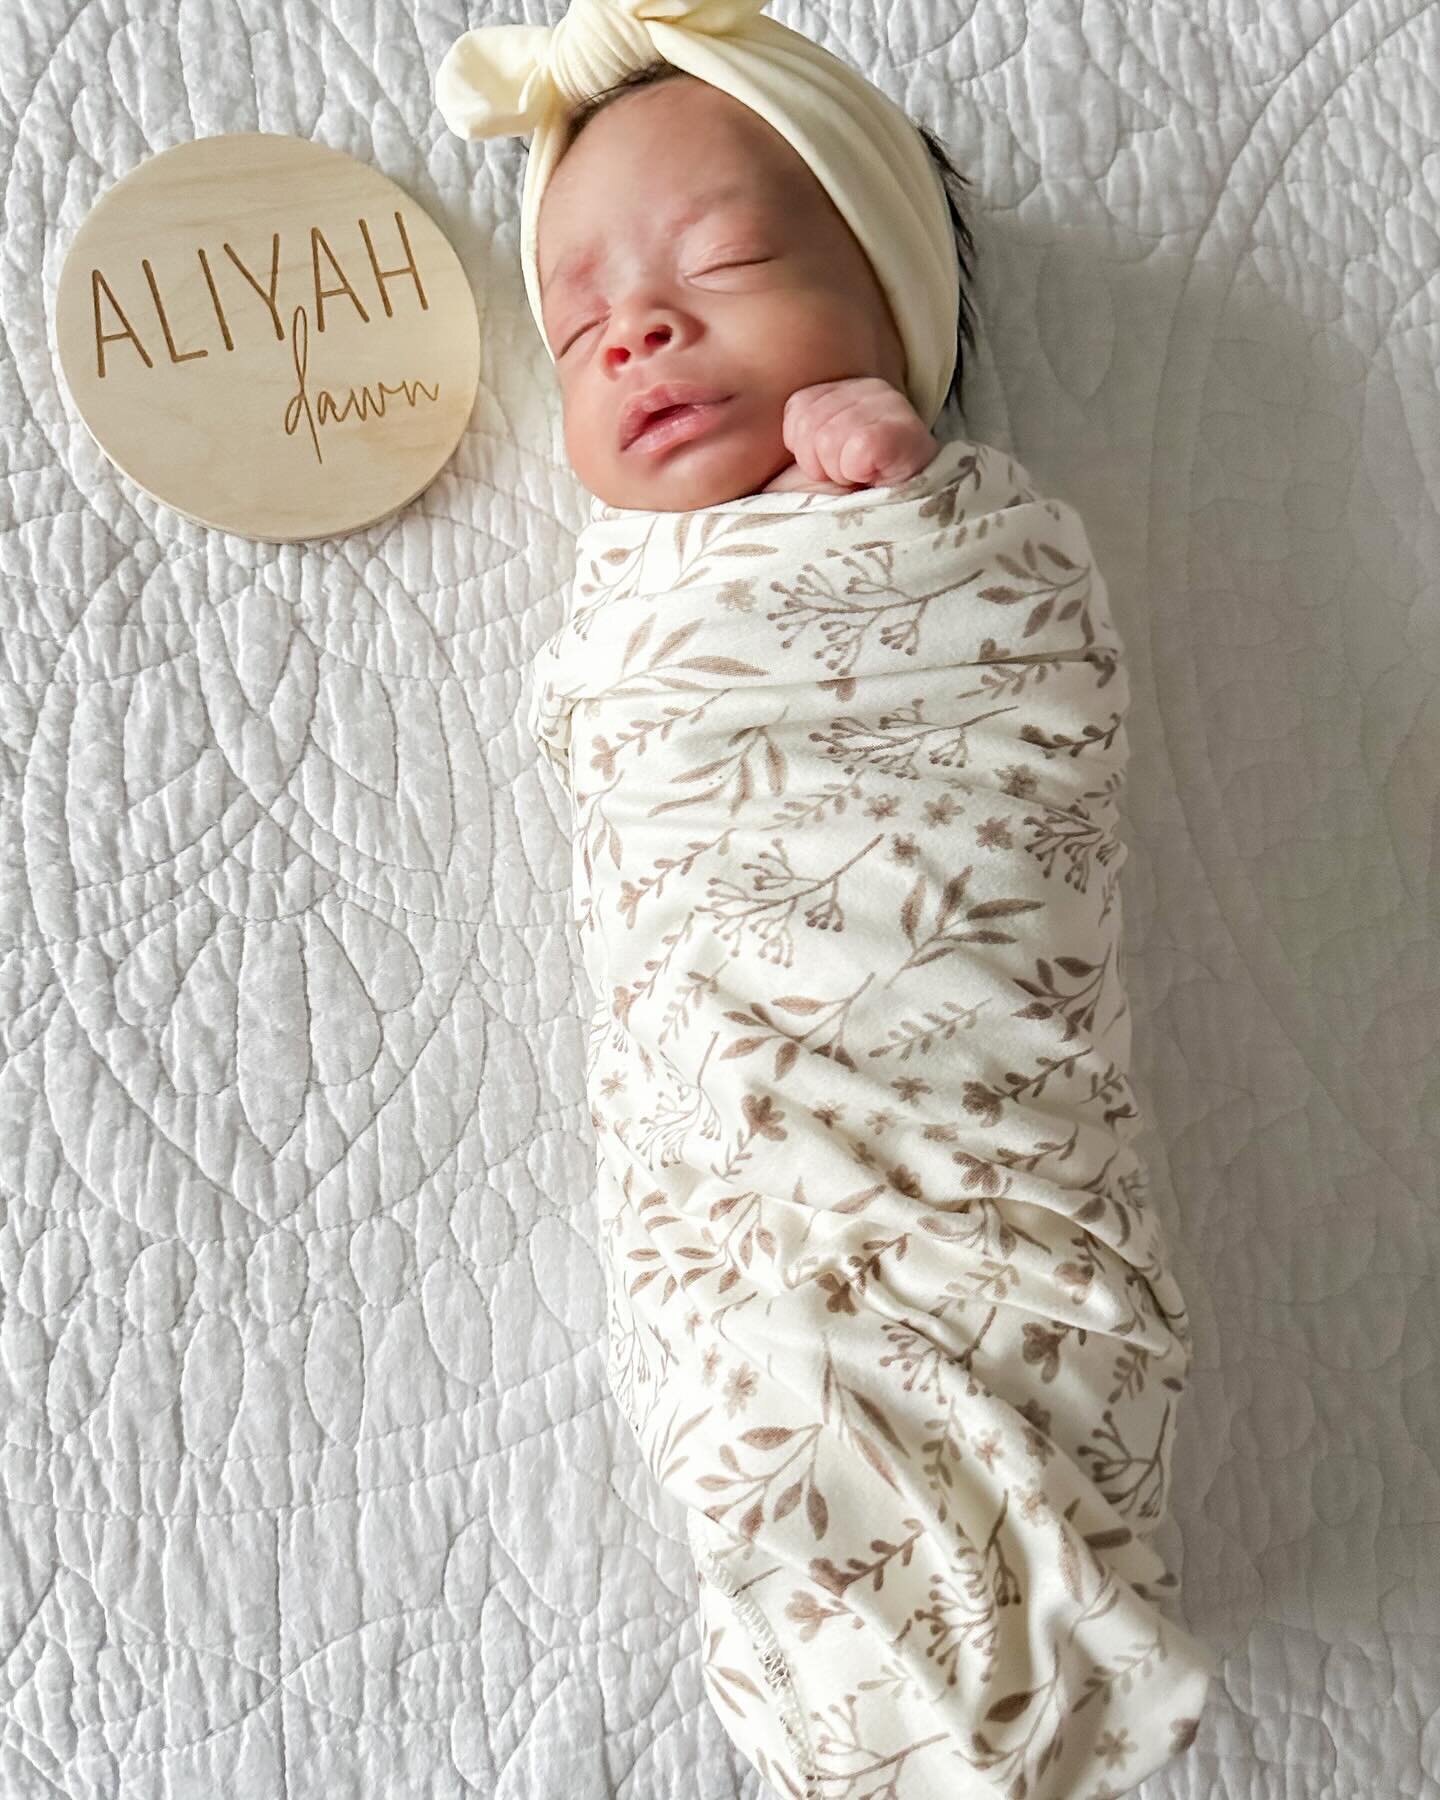 ✨Personal Post✨
&bull;
&bull;
Aliyah Dawn
10/25/2023
3lbs 5oz 
14.9&rdquo;

The last 6 weeks have been nothing short of a whirlwind, in the best way possible! Our sweet baby girl decided to make her entrance into the world 6 weeks early, and today we